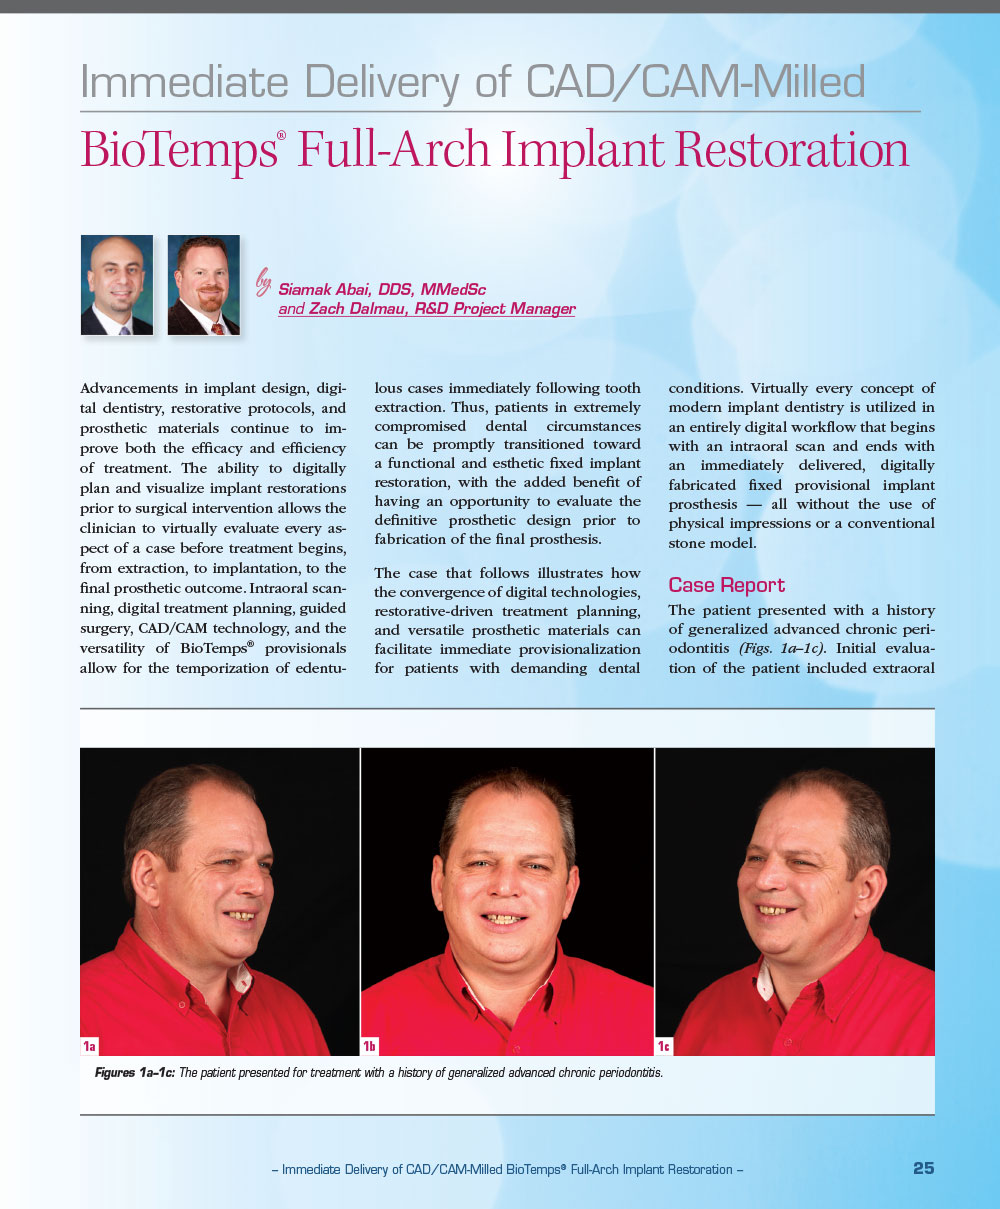 Immediate Delivery of CAD/CAM-Milled BioTemps® Full-Arch Implant Restoration